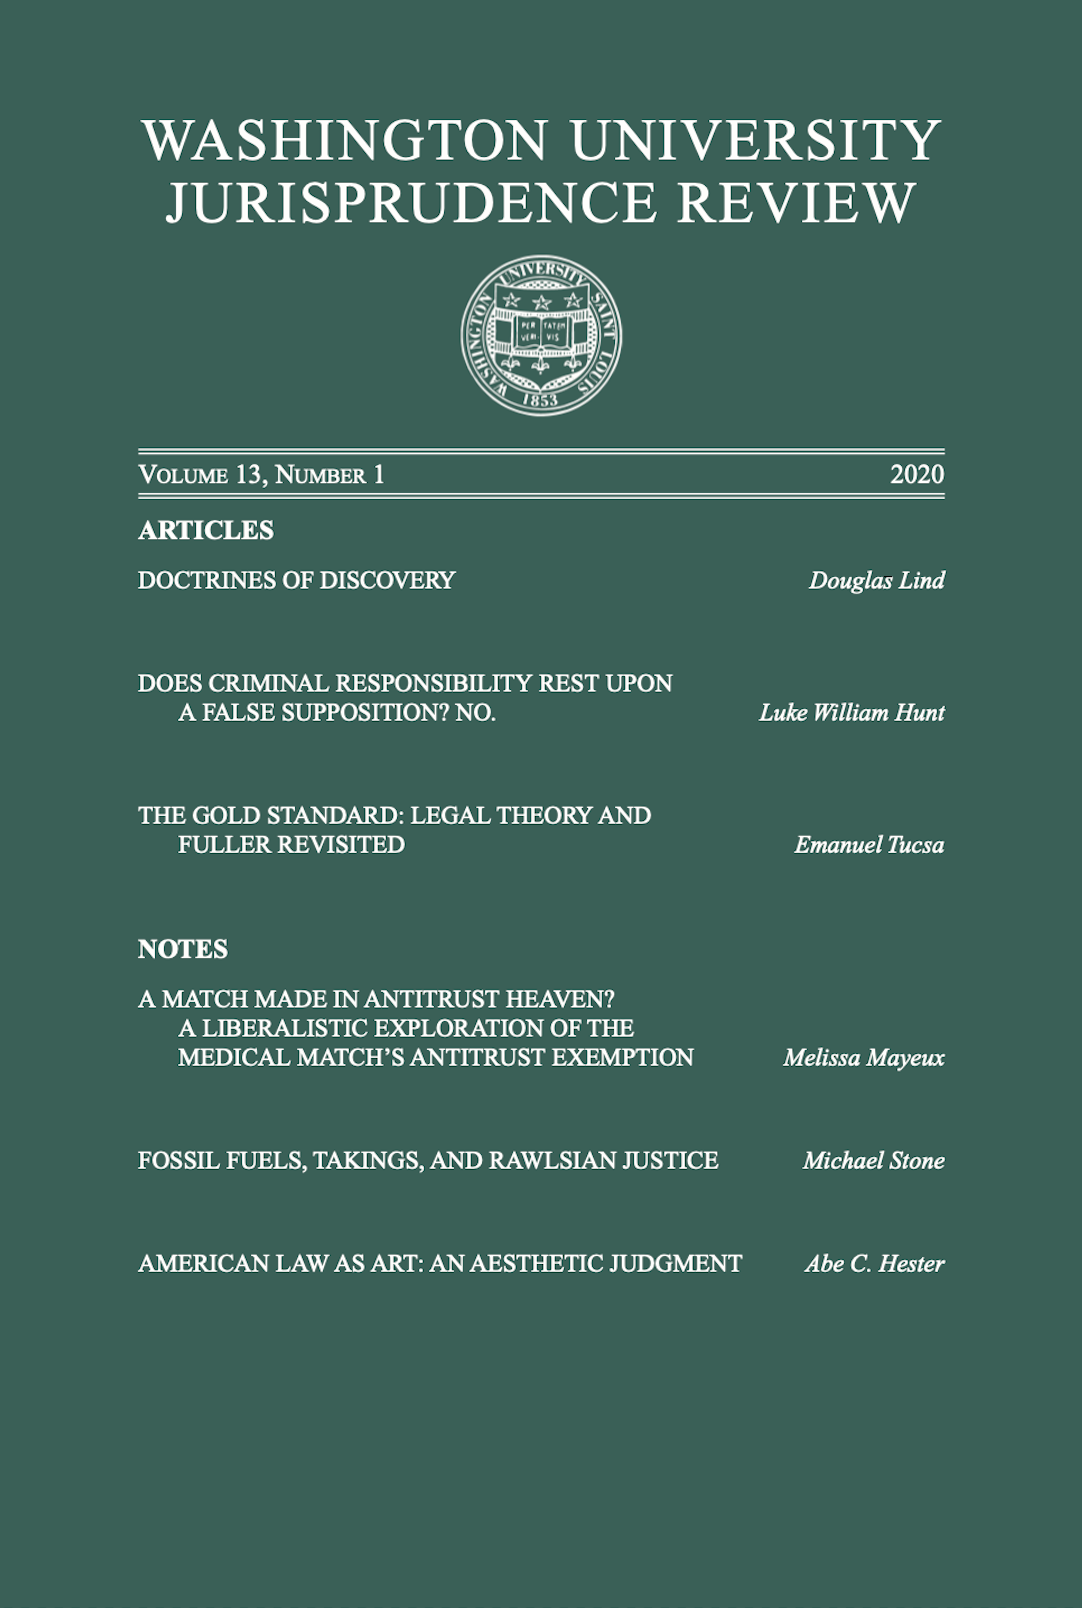 Law Reviews | Law Review Commons